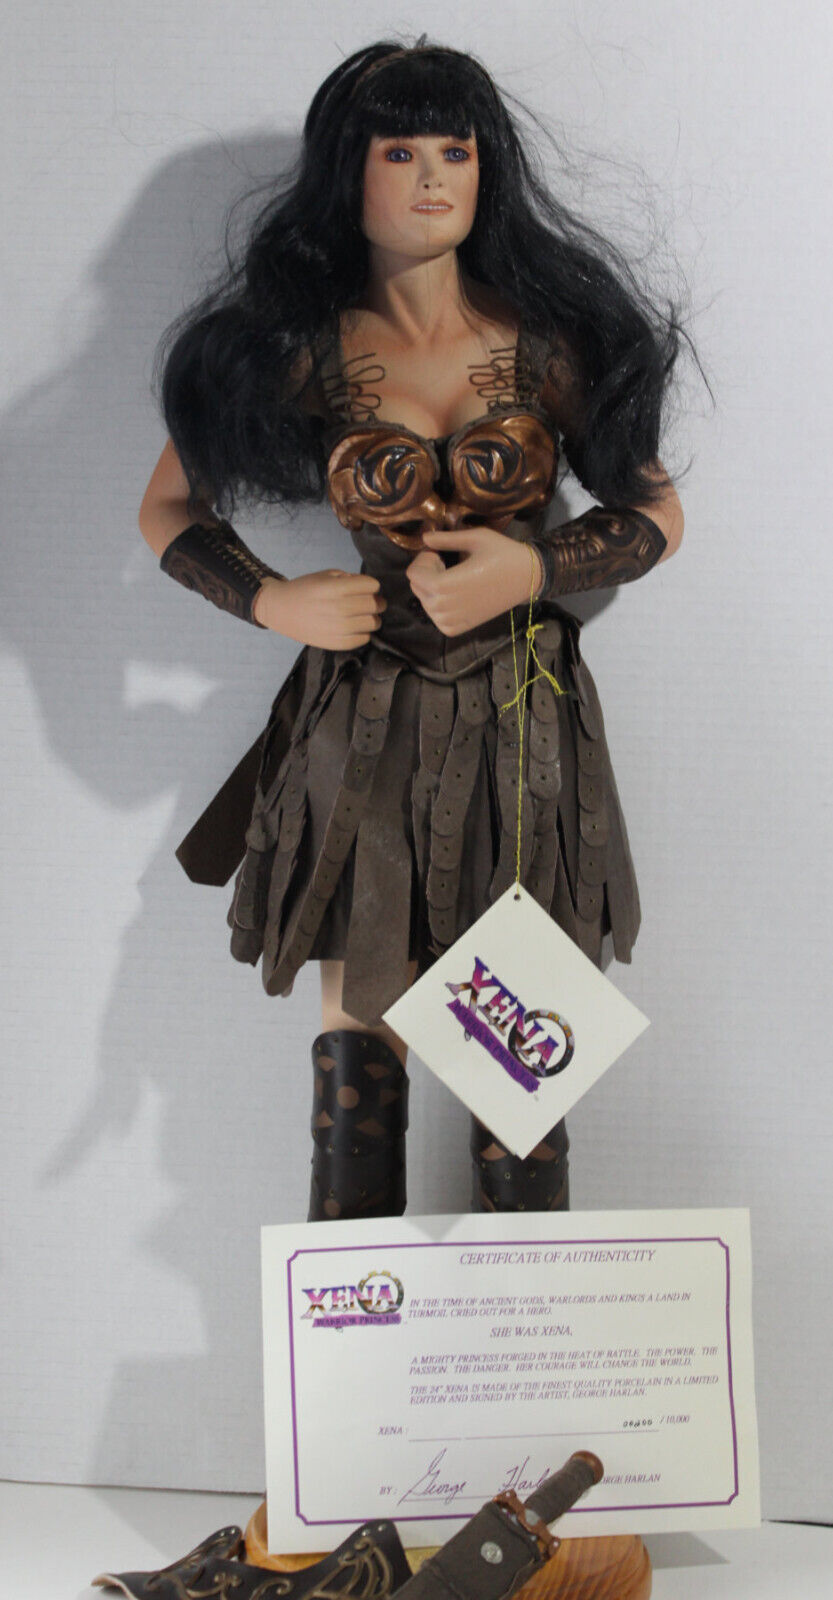 VINTAGE XENA 24 IN PORCELAIN DOLL FIGURE SIGNED GEORGE HARLAN W/COA NO BOX